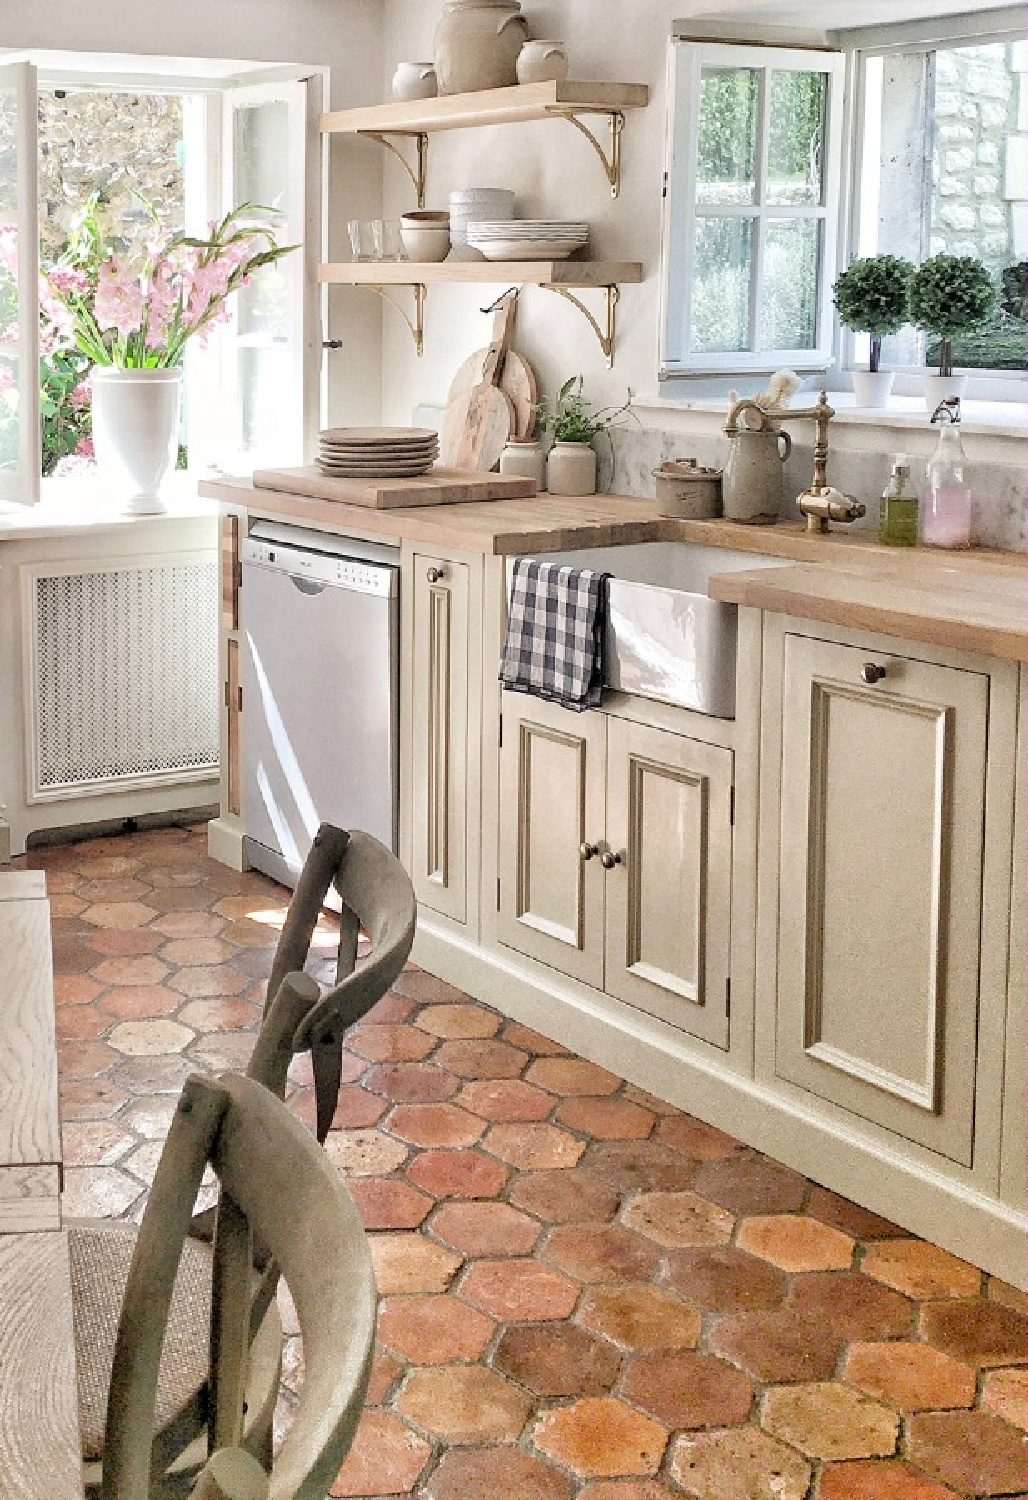 French kitchen with open shelving, antique pots, topiaries, terracotta hex tile floor and limestone painted cabinets in authentic French farmhouse. Vivi et Margot. #frenchkitchens #frenchfarmhouse